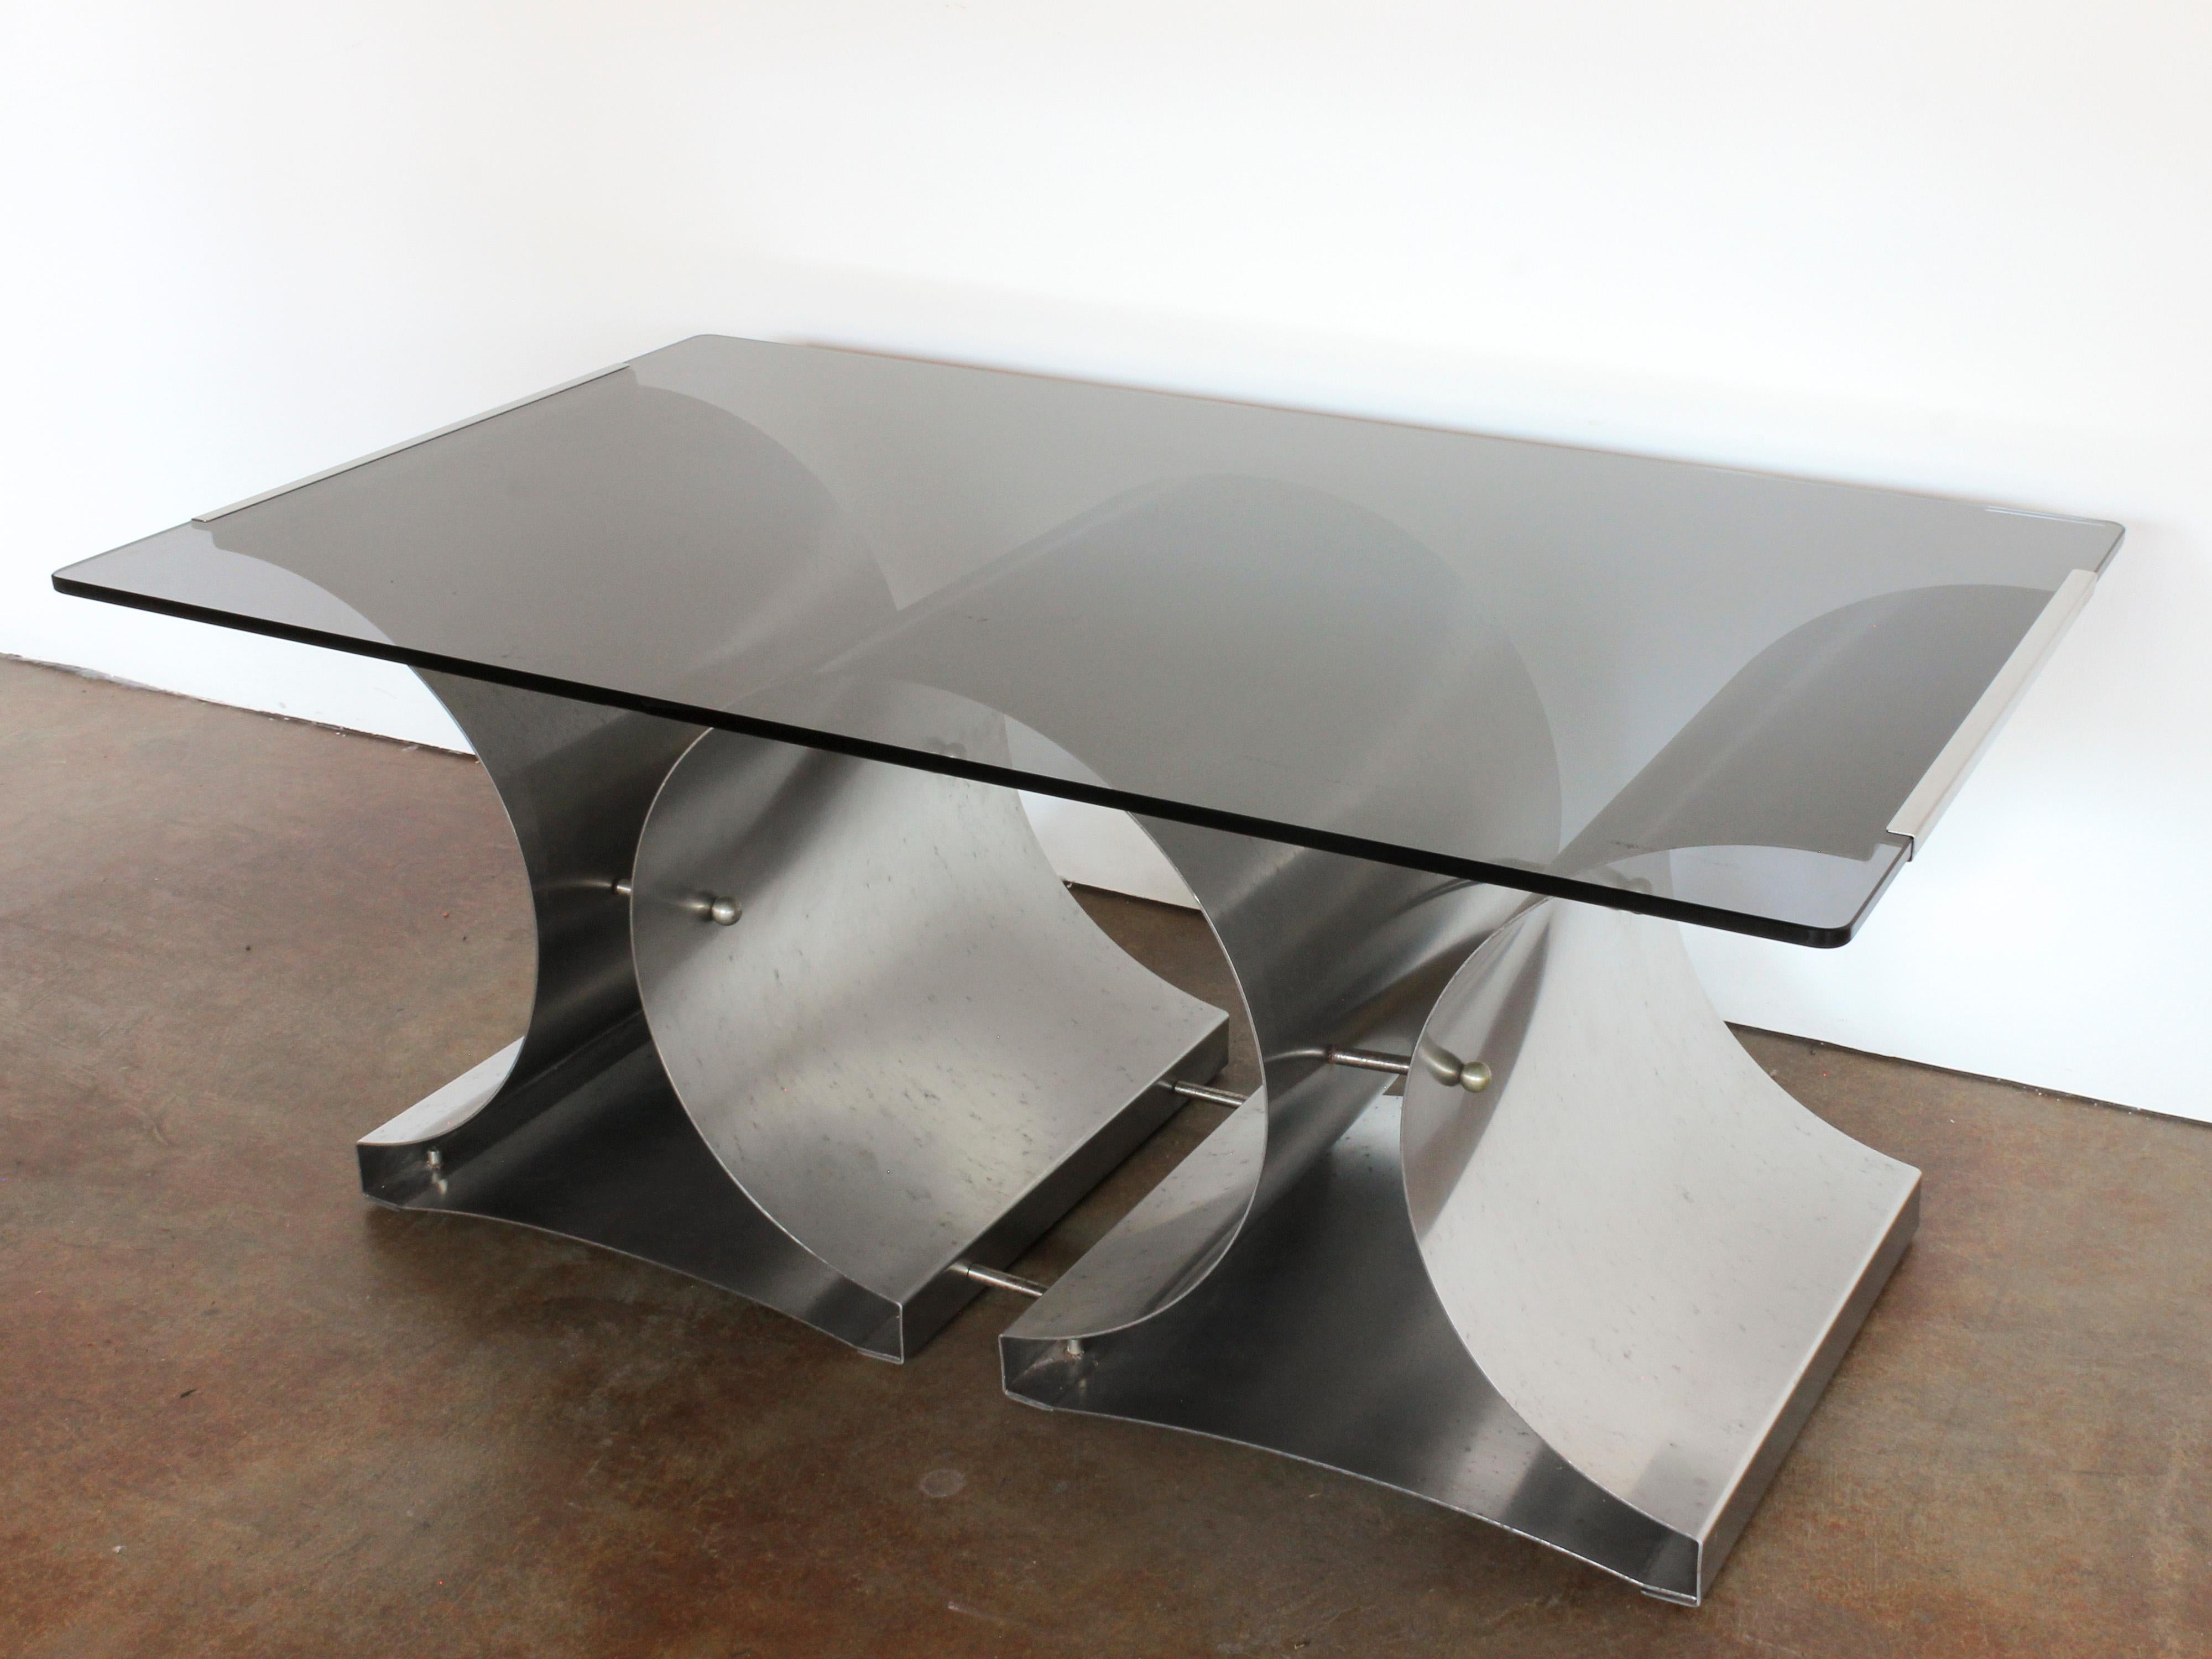 Late 20th Century Steel and Glass Coffee Table by Francois Monnet for Kappa, French, c. 1970 For Sale